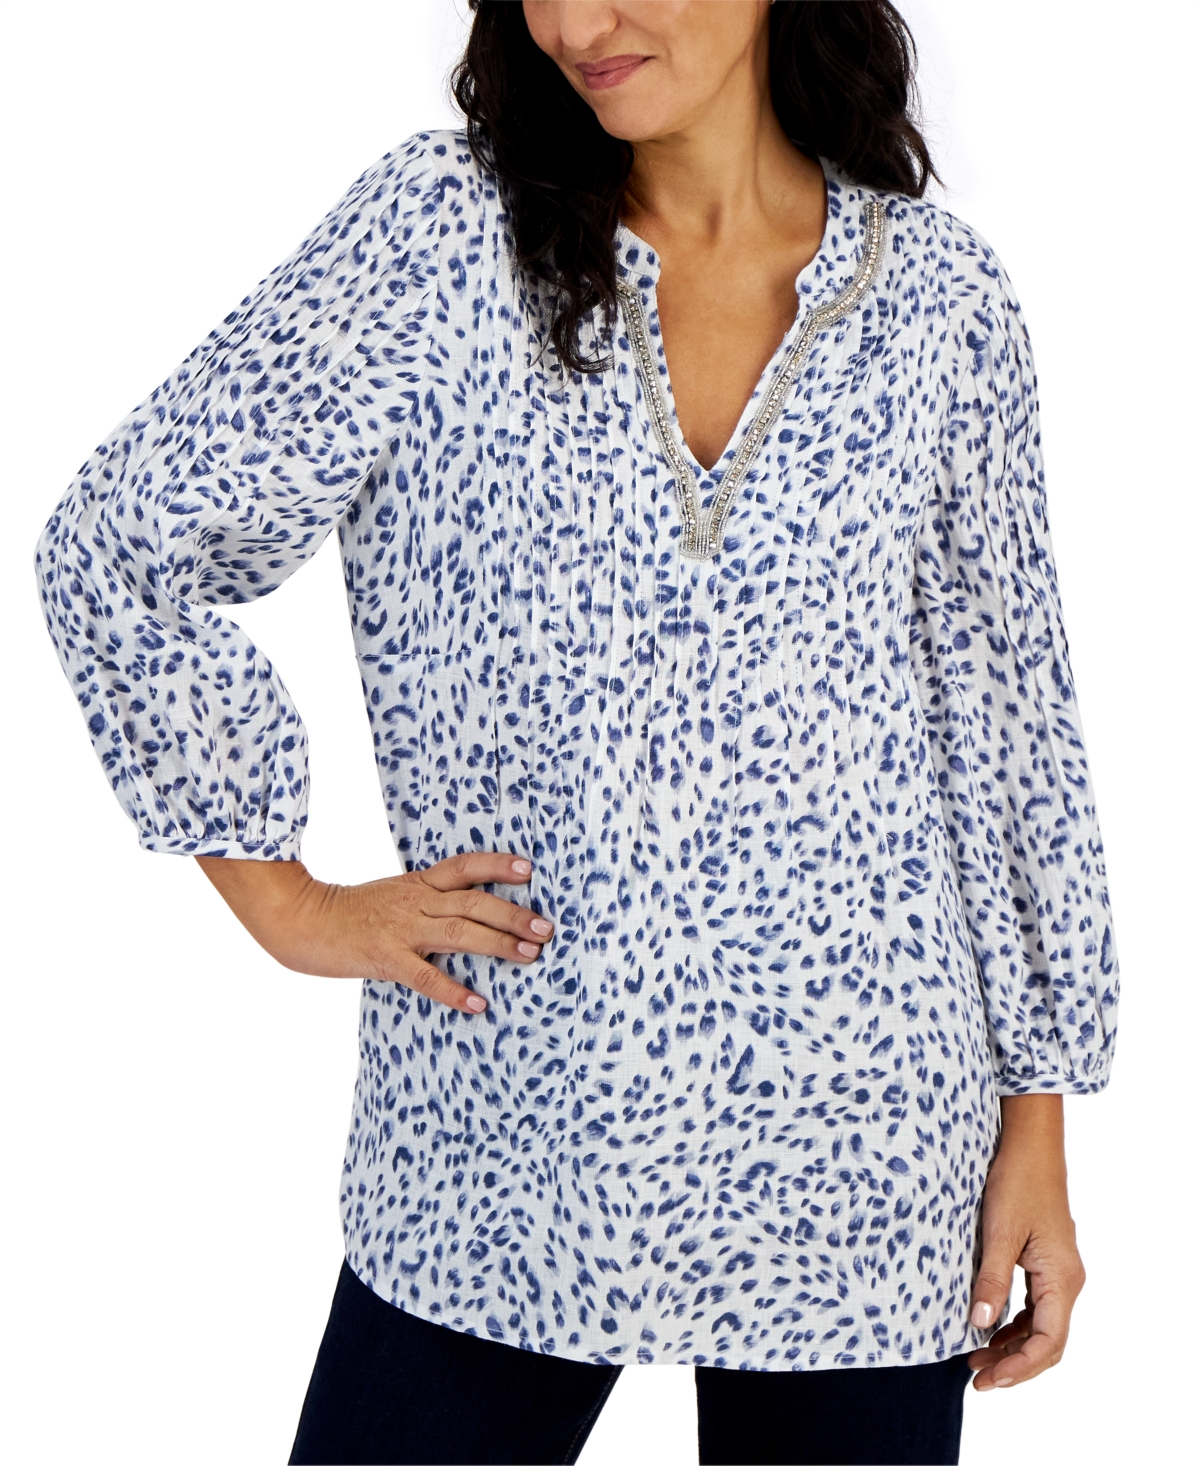 CHARTER CLUB PETITE 3/4 PUFF SLEEVE BRUSHED SPOTTED PRINT LINEN TUNIC, CREATED FOR MACY'S